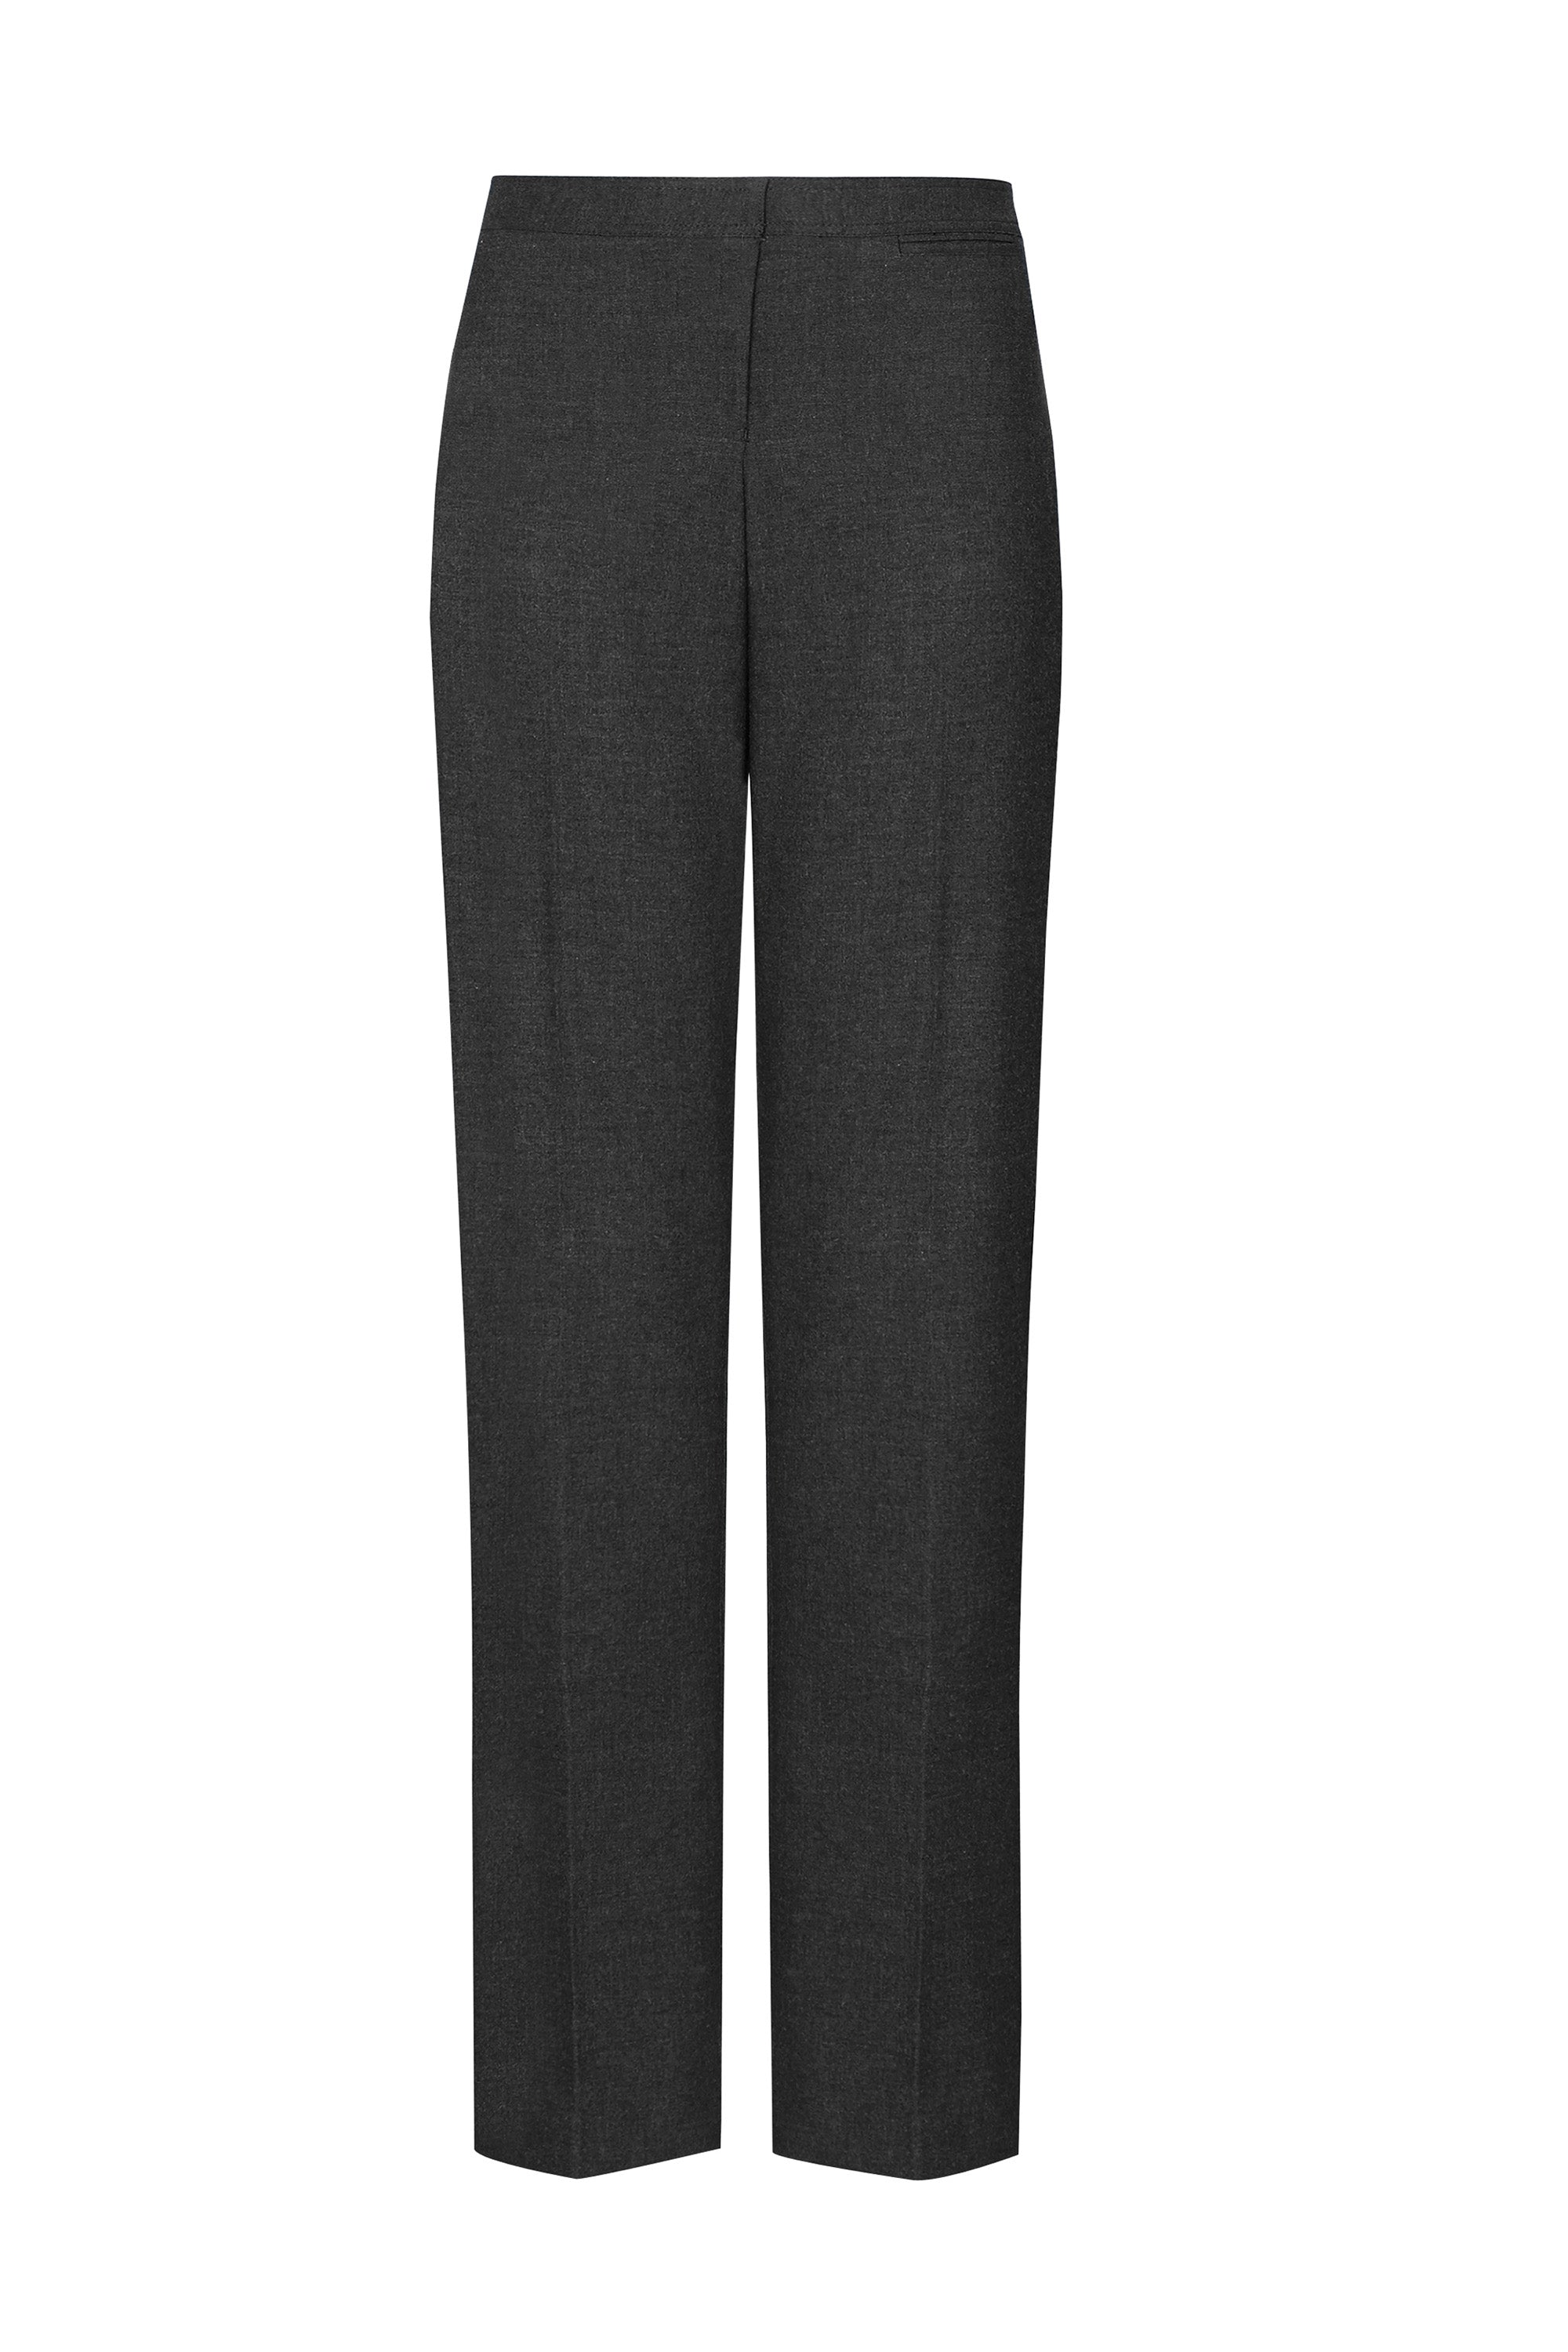 LALAGE BEAUMONT Ladies Wool Trousers Dogtooth Check Black White UK Size 14  | eBay